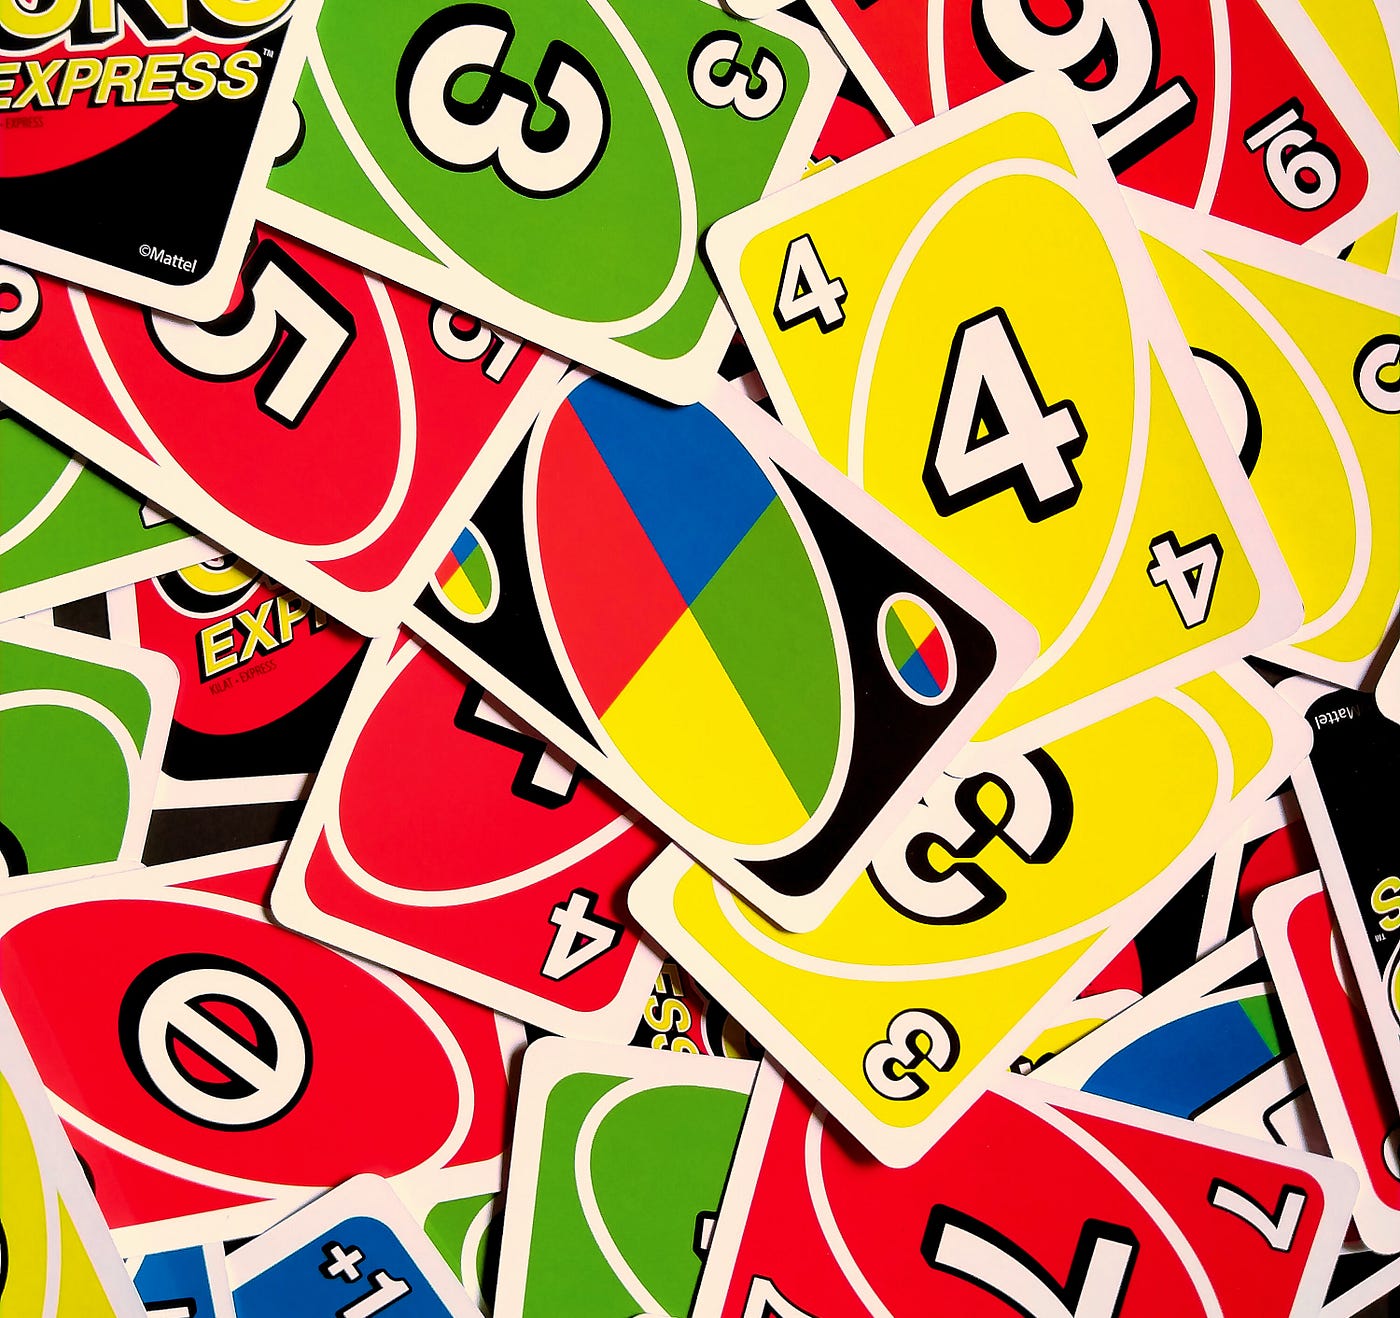 Mattel Is Seeking a Chief UNO Player With 'Good Vibes